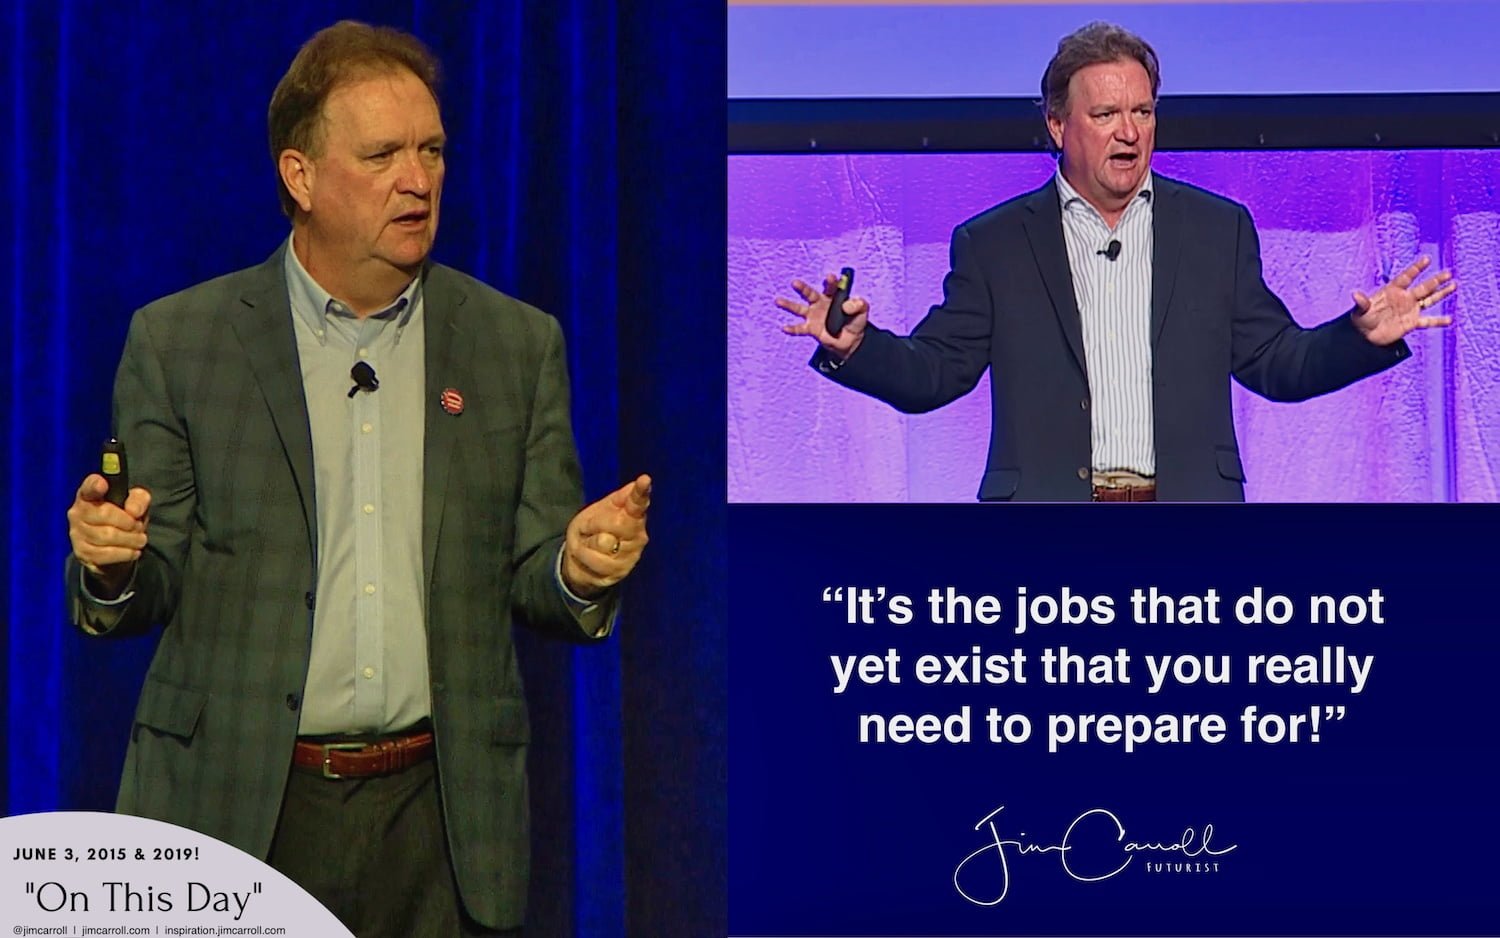 Daily Inspiration: “It’s the jobs that do not yet exist that you really need to prepare for!”